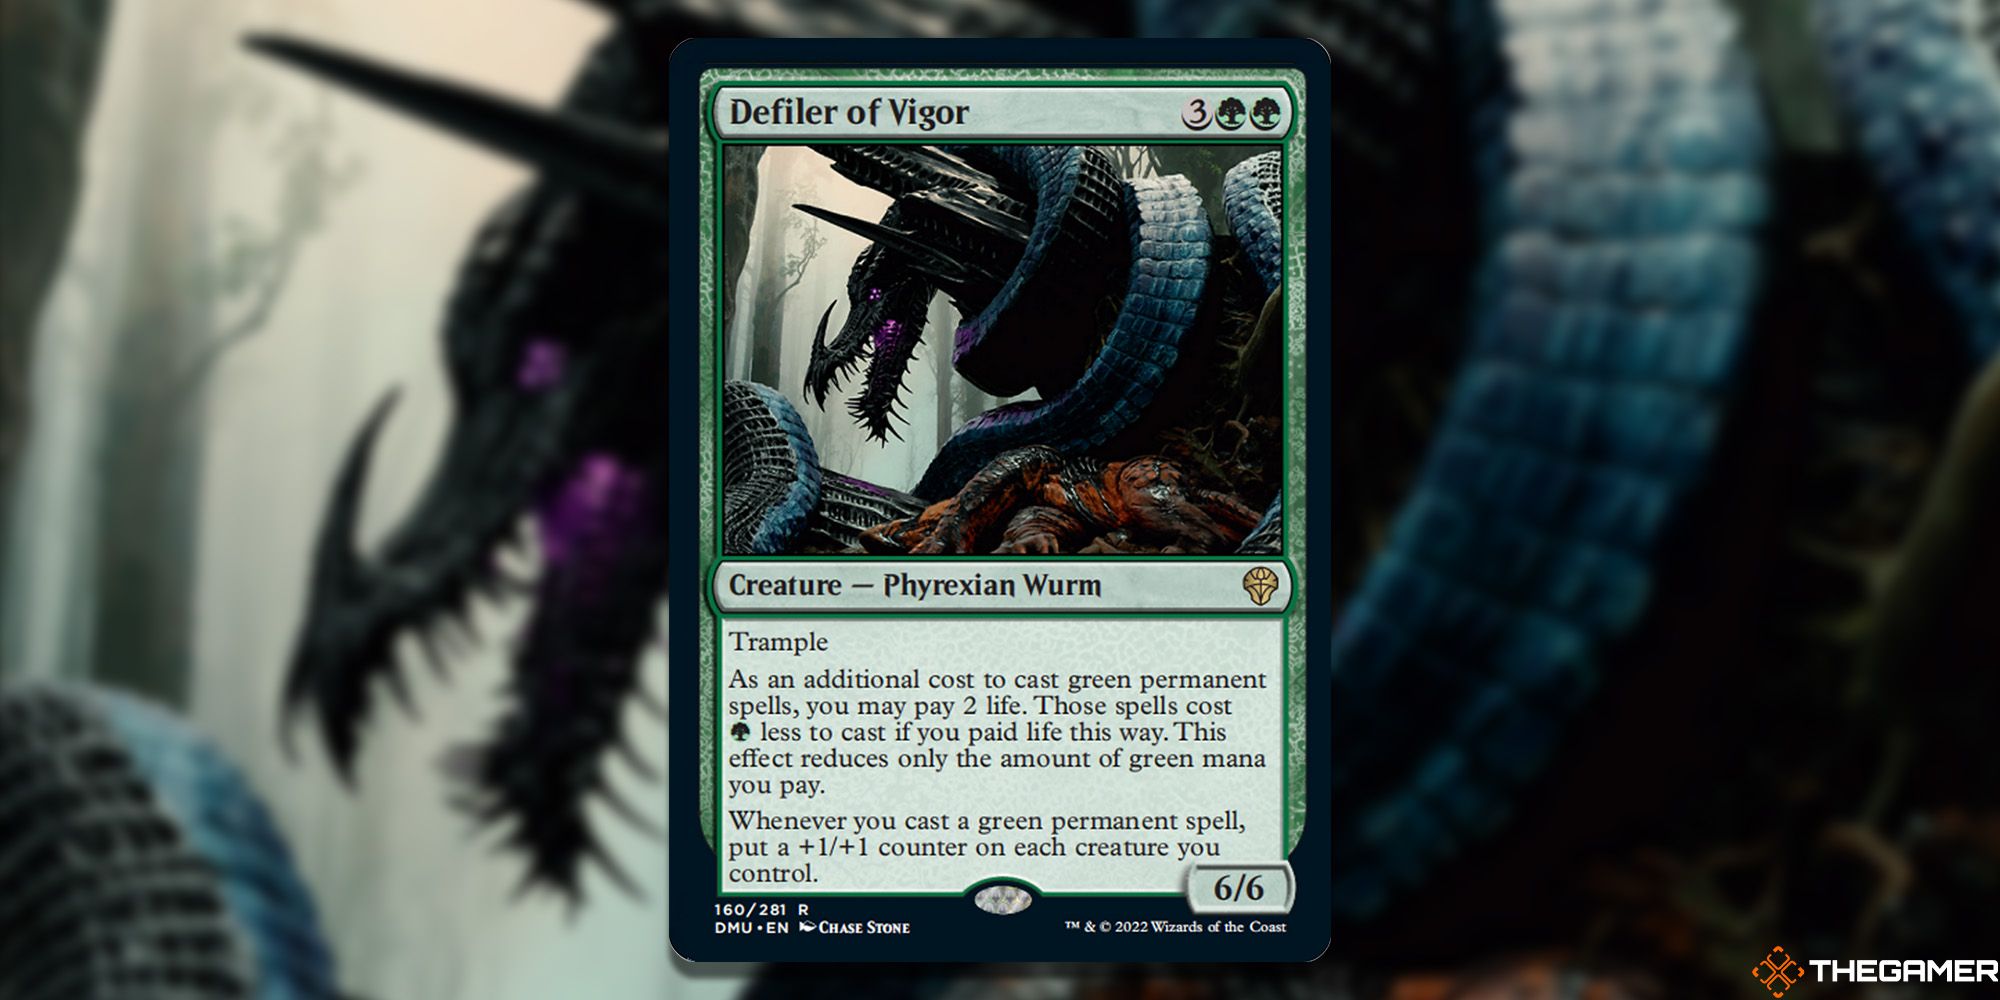 Image of the Defiler of Vigor card in Magic: The Gathering, with artby Chase Stone